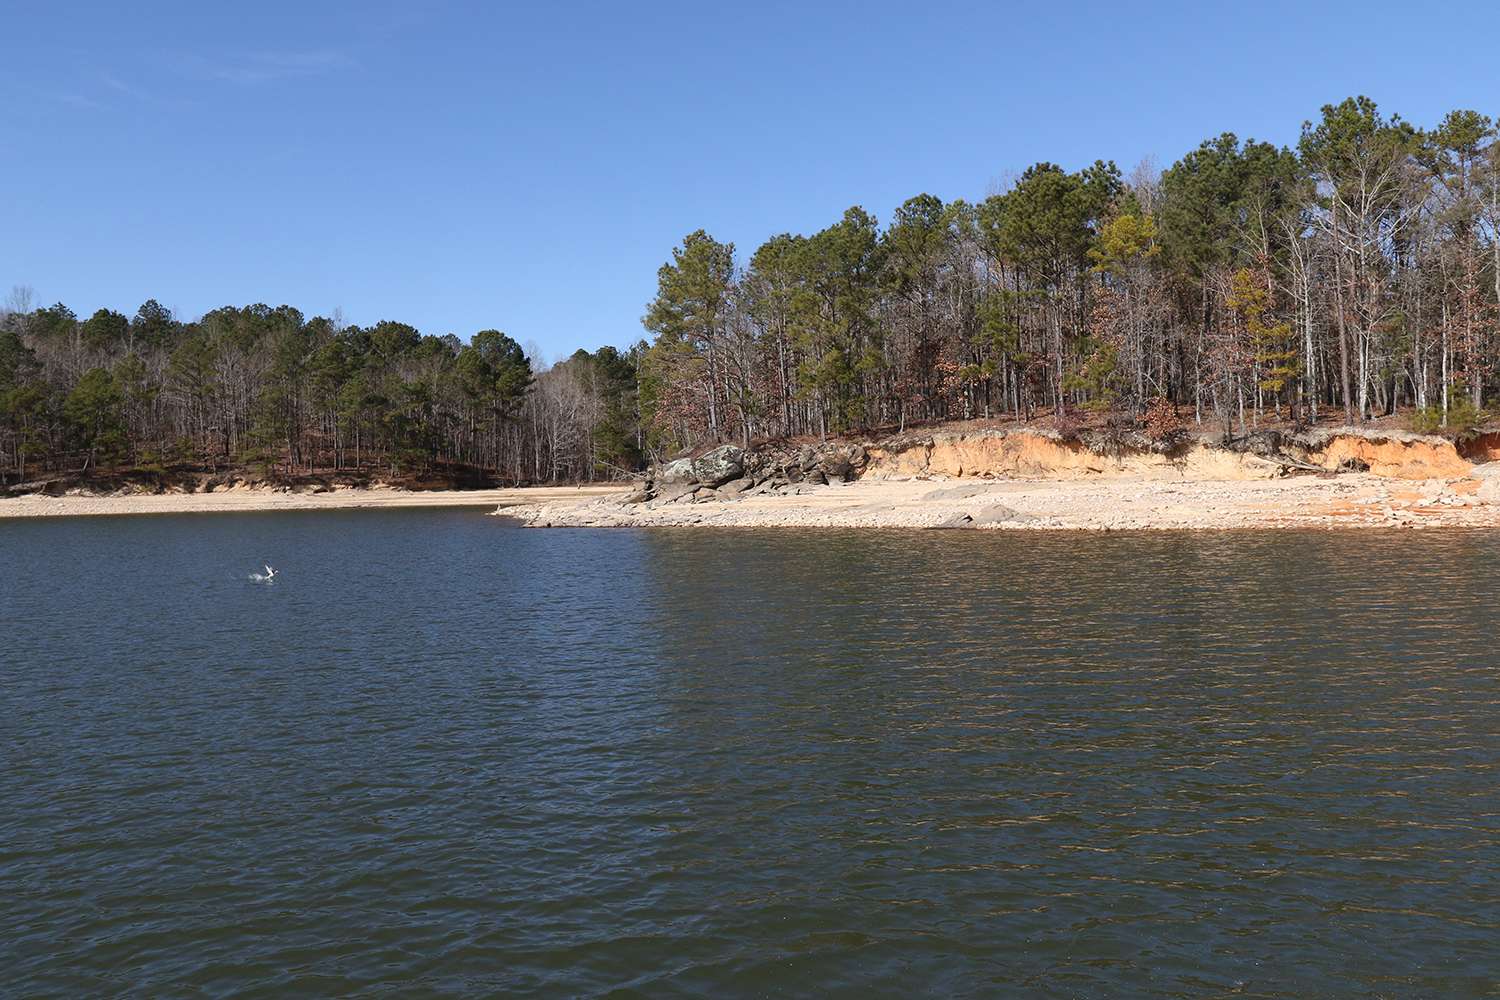 The lake is heavily wooded, but the structure base is primarily rock and scattered wood. 